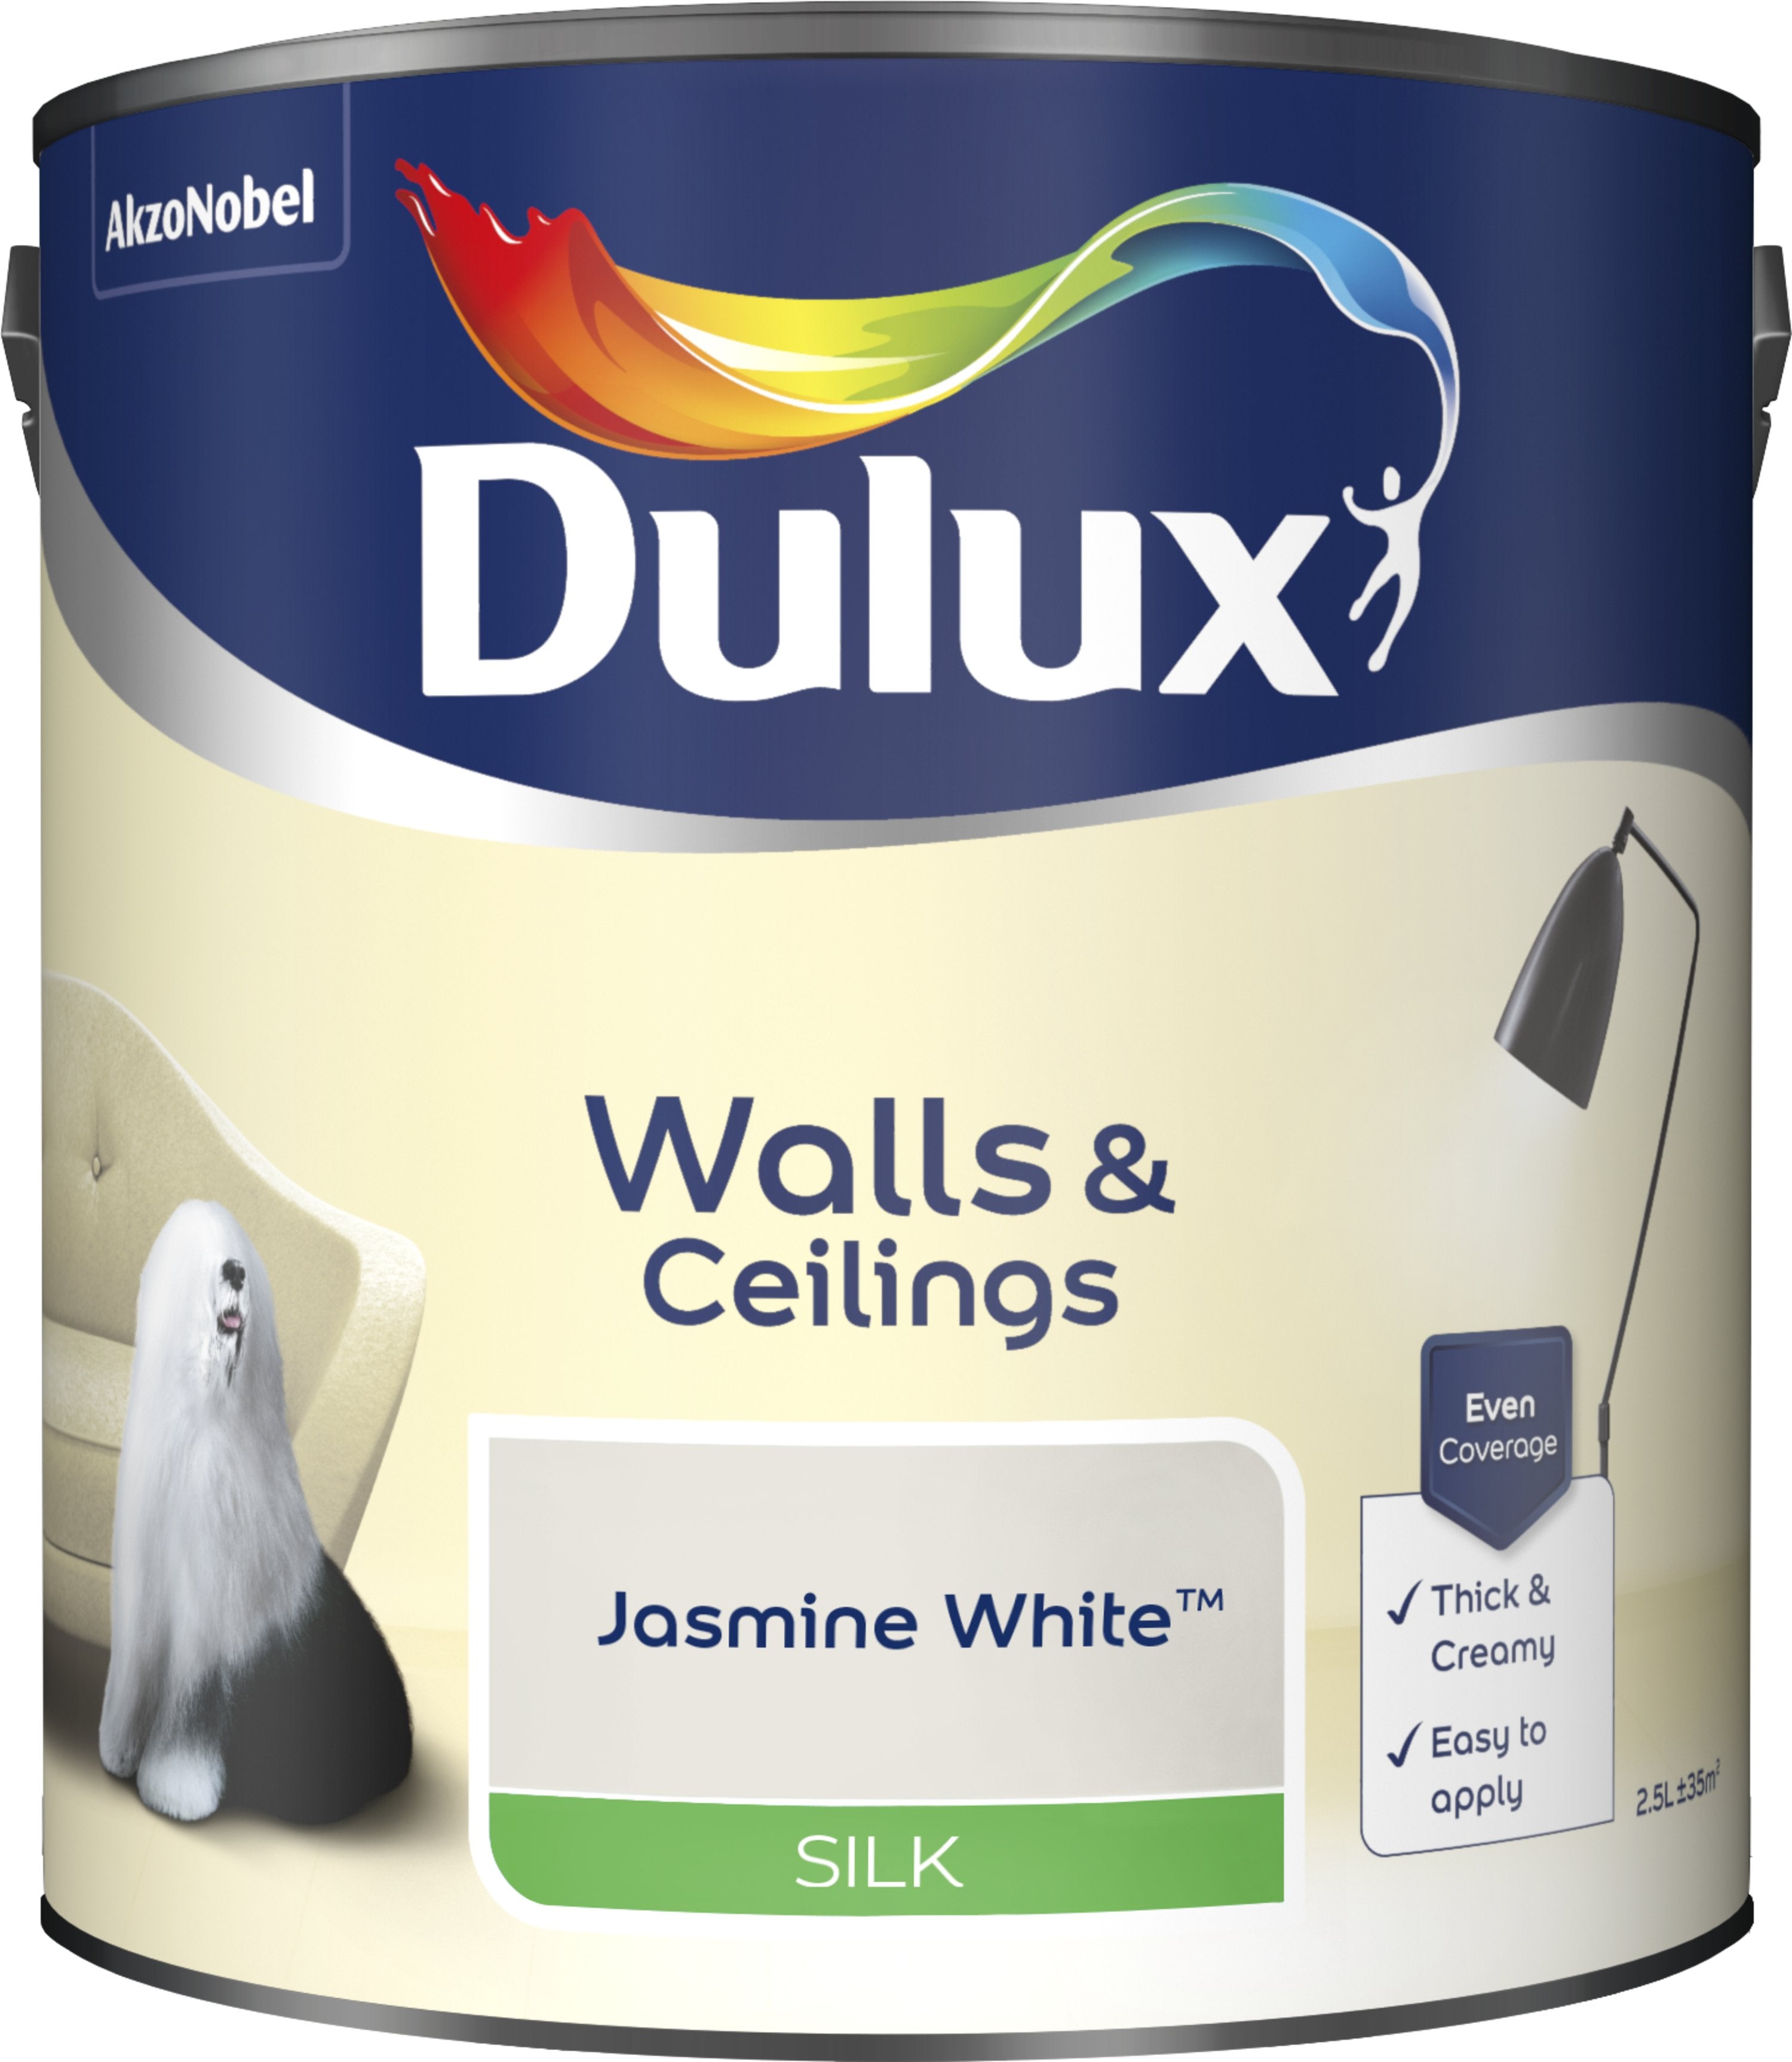 Dulux Silk Emulsion Paint For Walls And Ceilings - Jasmine White 2.5L Garden & Diy  Home